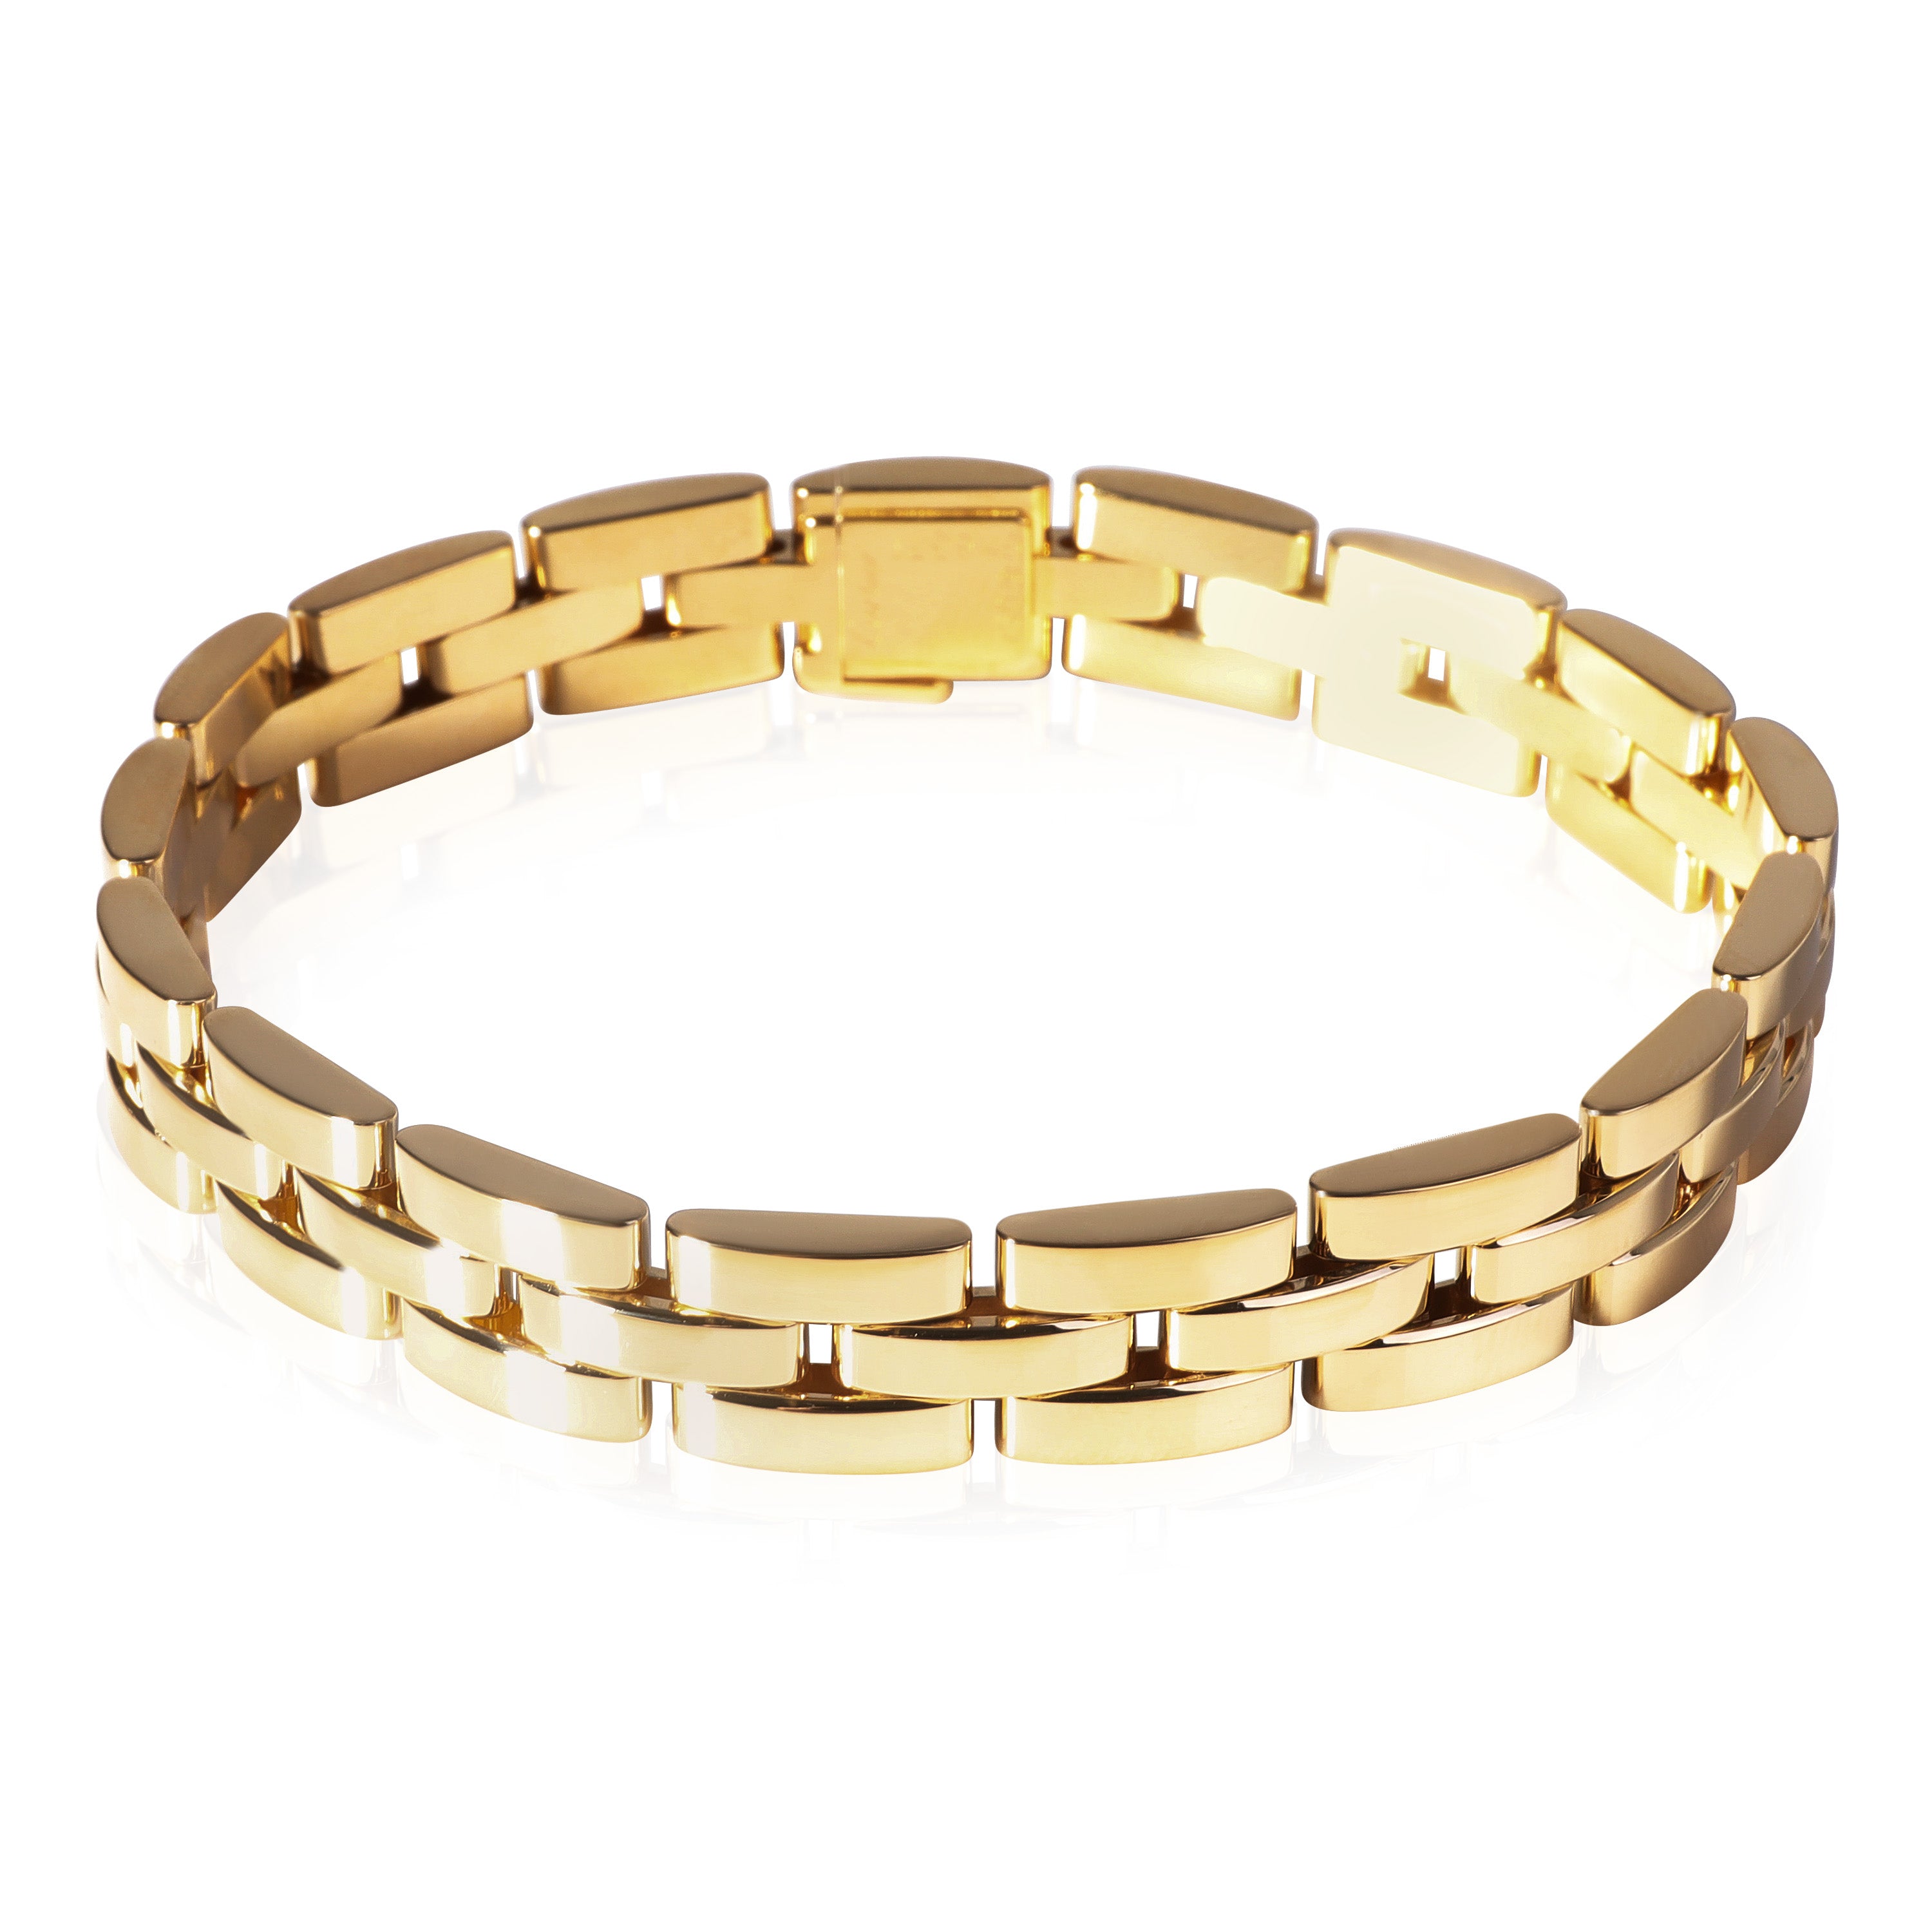 Cartier Maillon Panthere Bracelet in 18k Pink Gold With Black